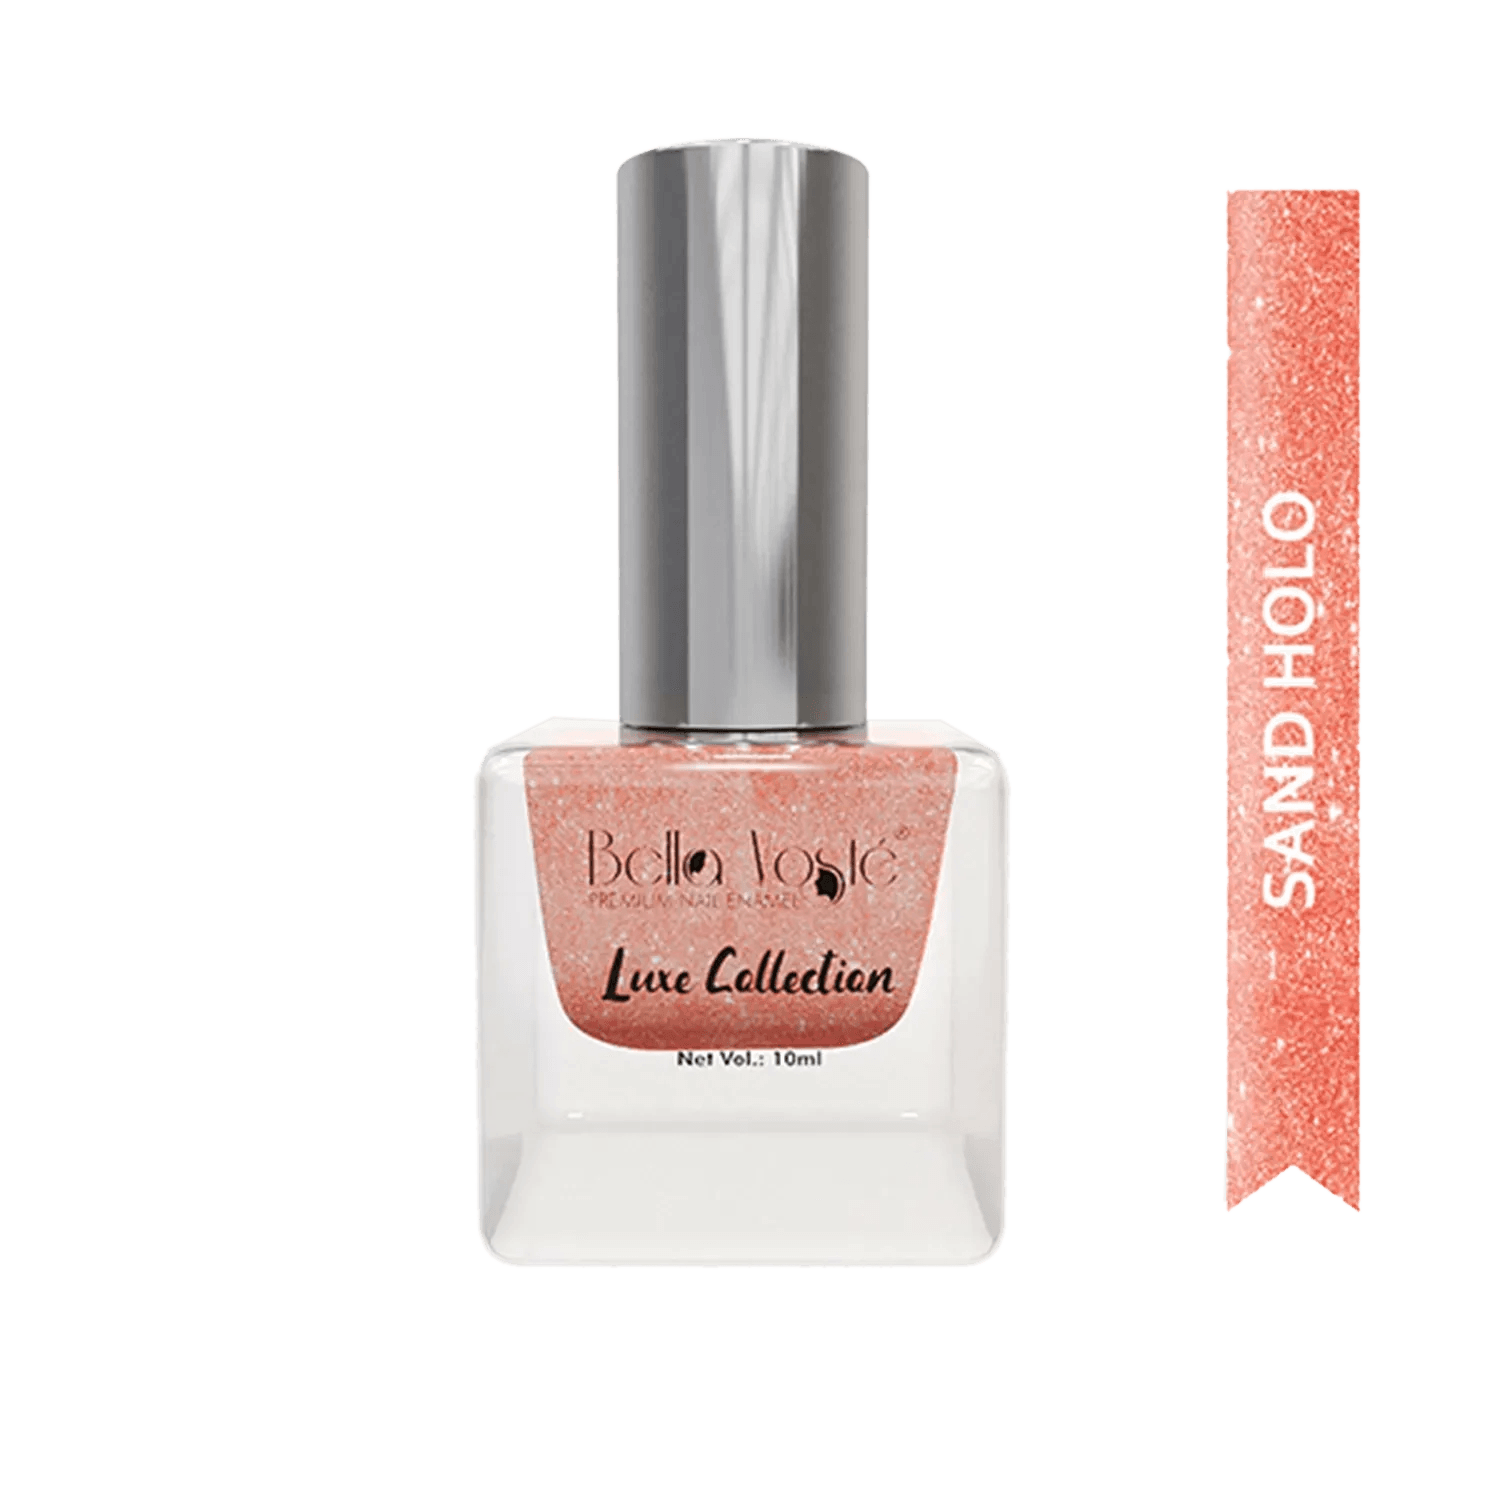 Plum Color Affair All That Glitters Nail Paint (Champagne Fizz 164) Price -  Buy Online at Best Price in India